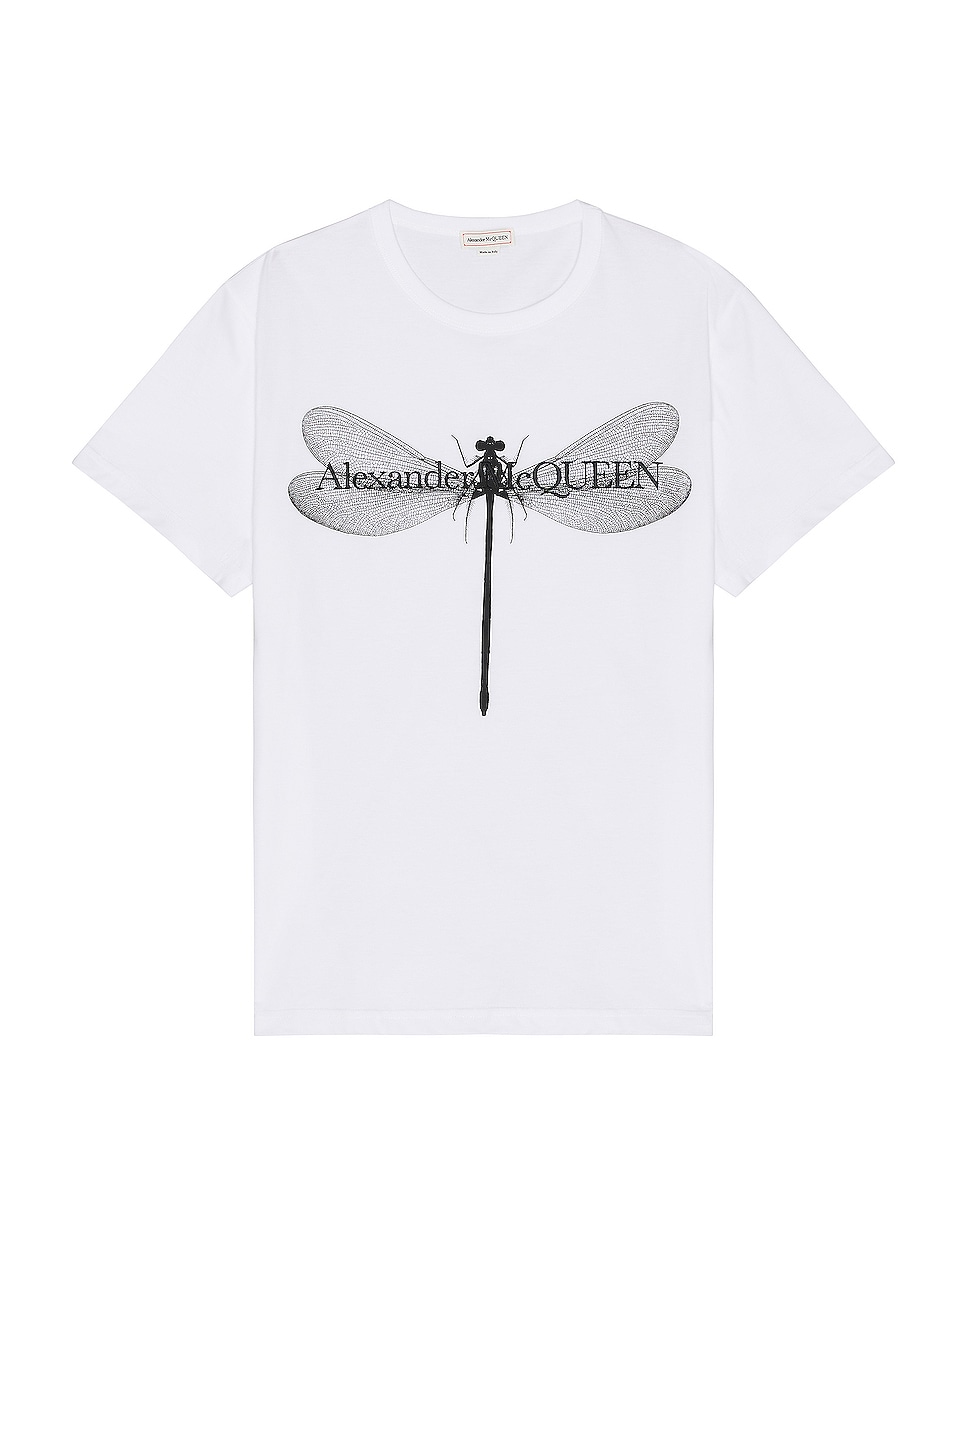 Image 1 of Alexander McQueen Dragonfly Print T-shirt in White & Black